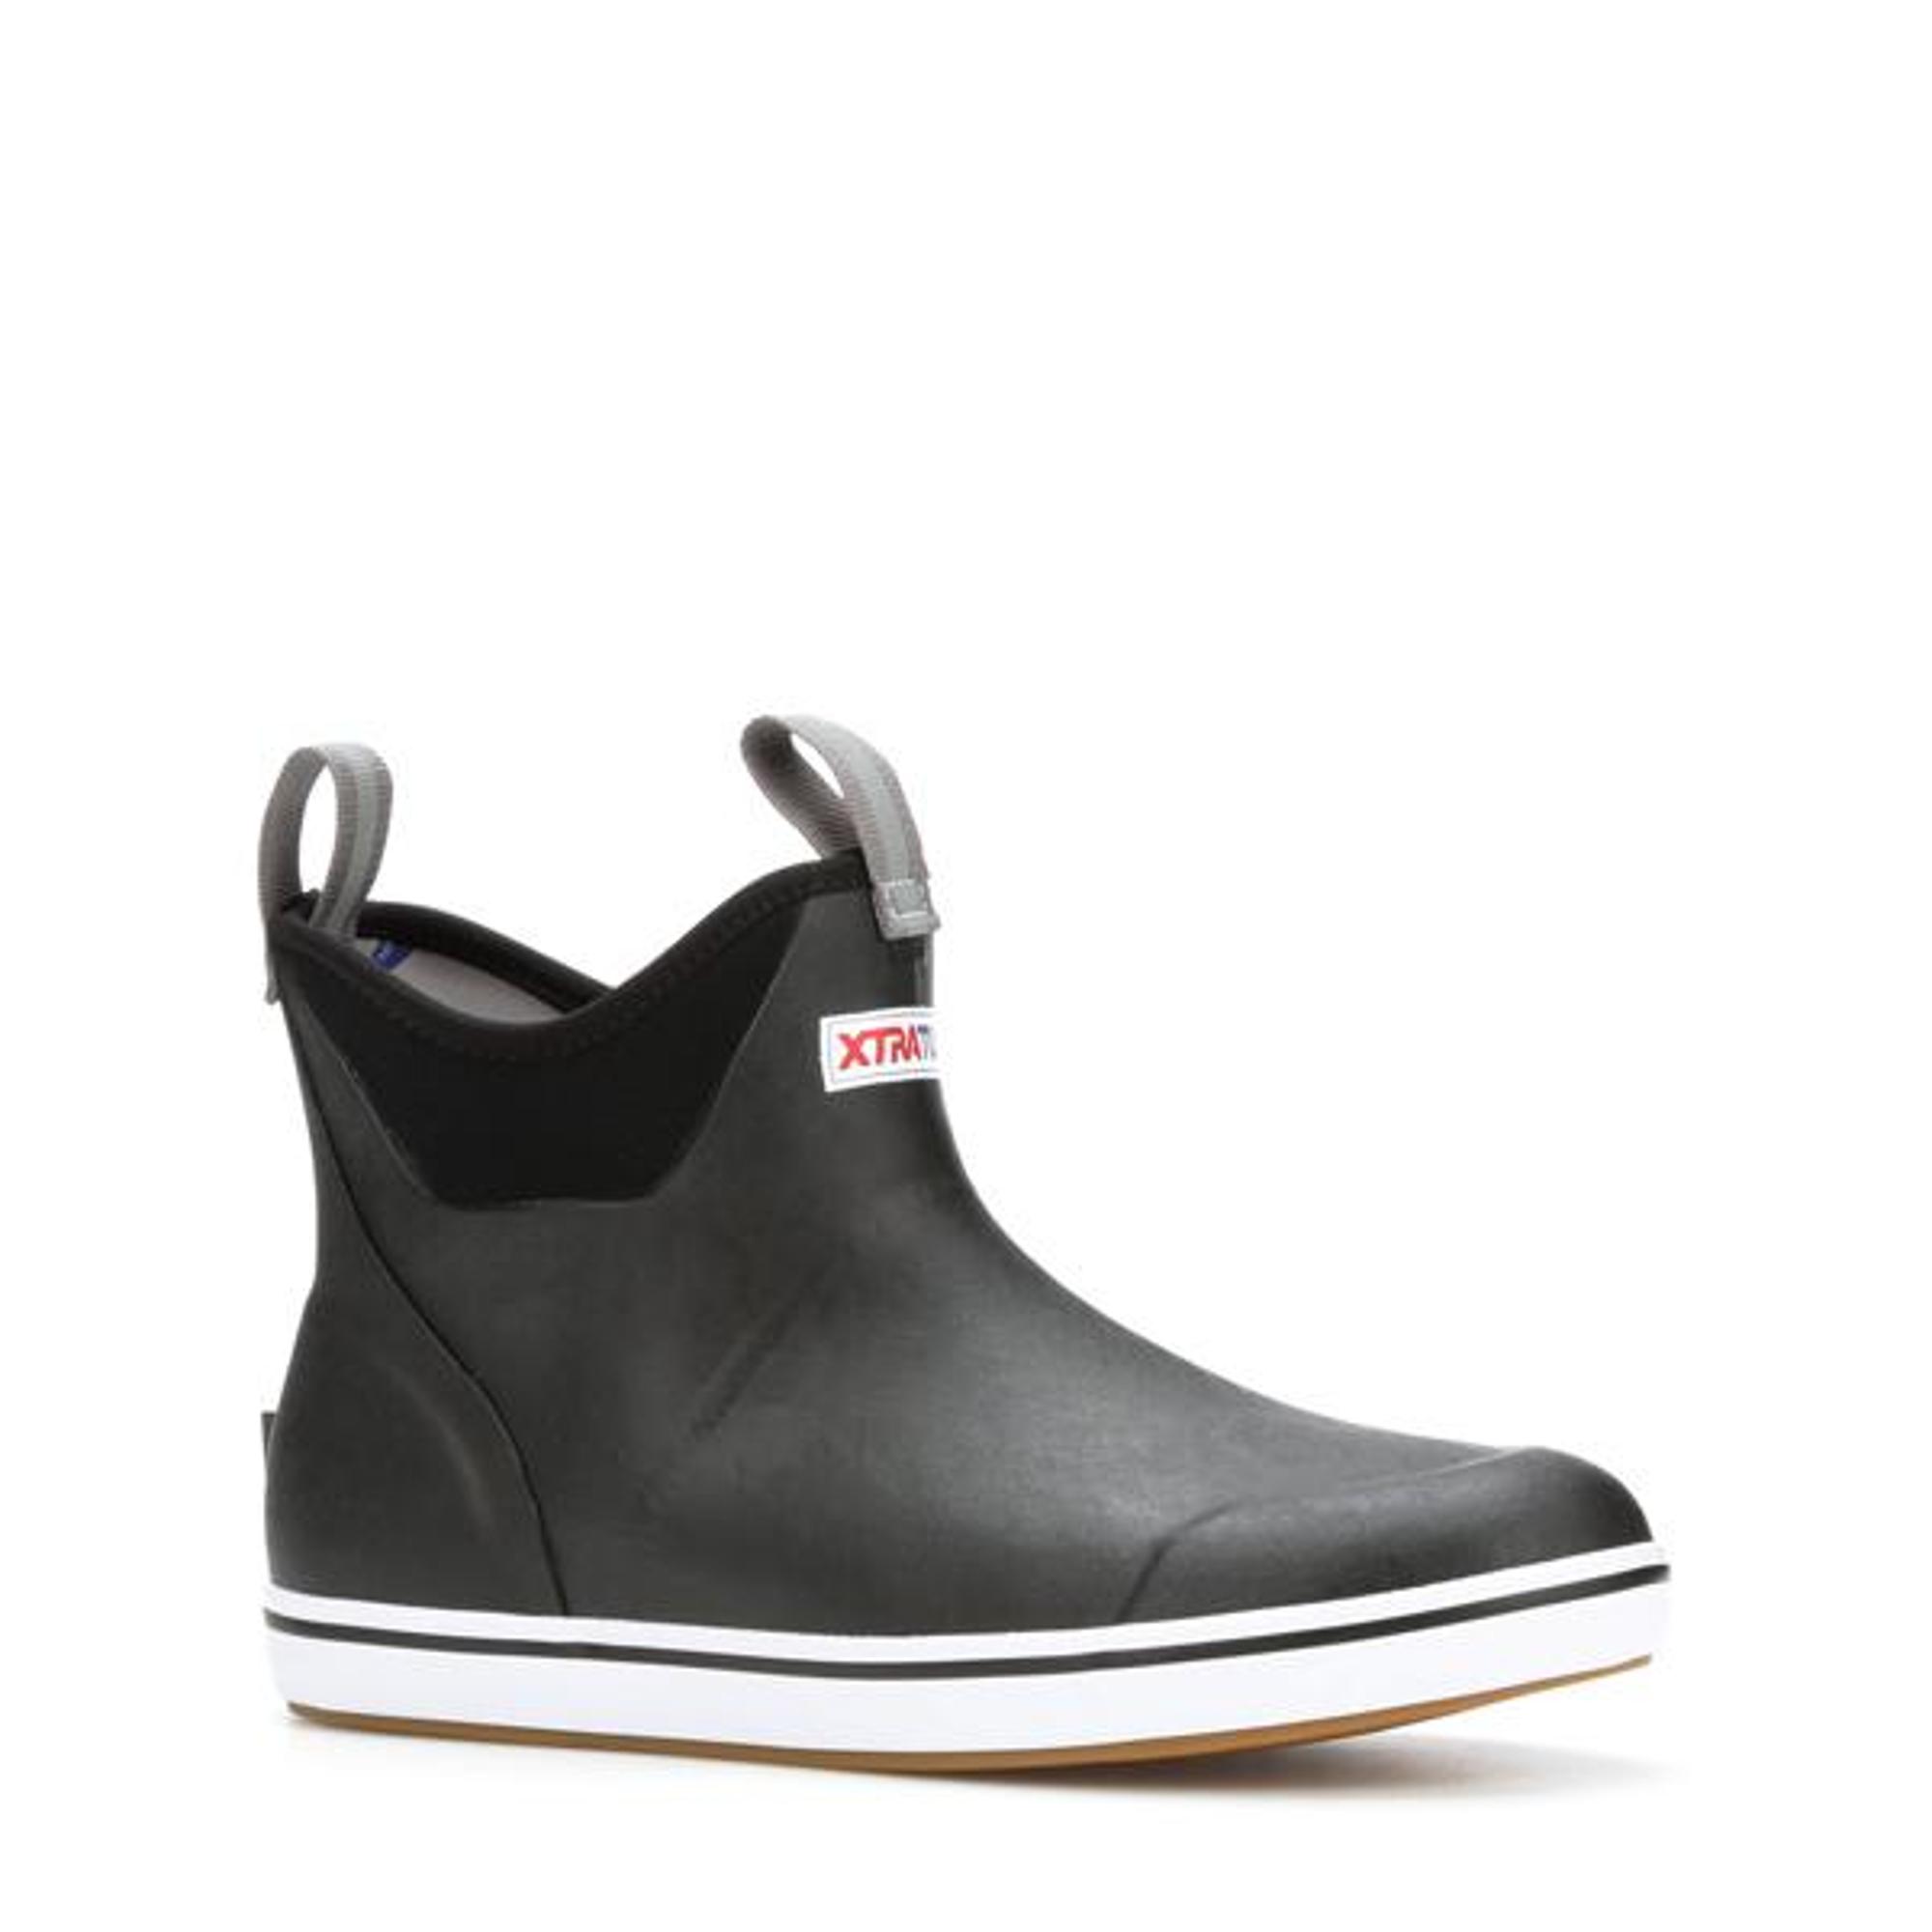 Women's 6 Inch Ankle Deck Boot